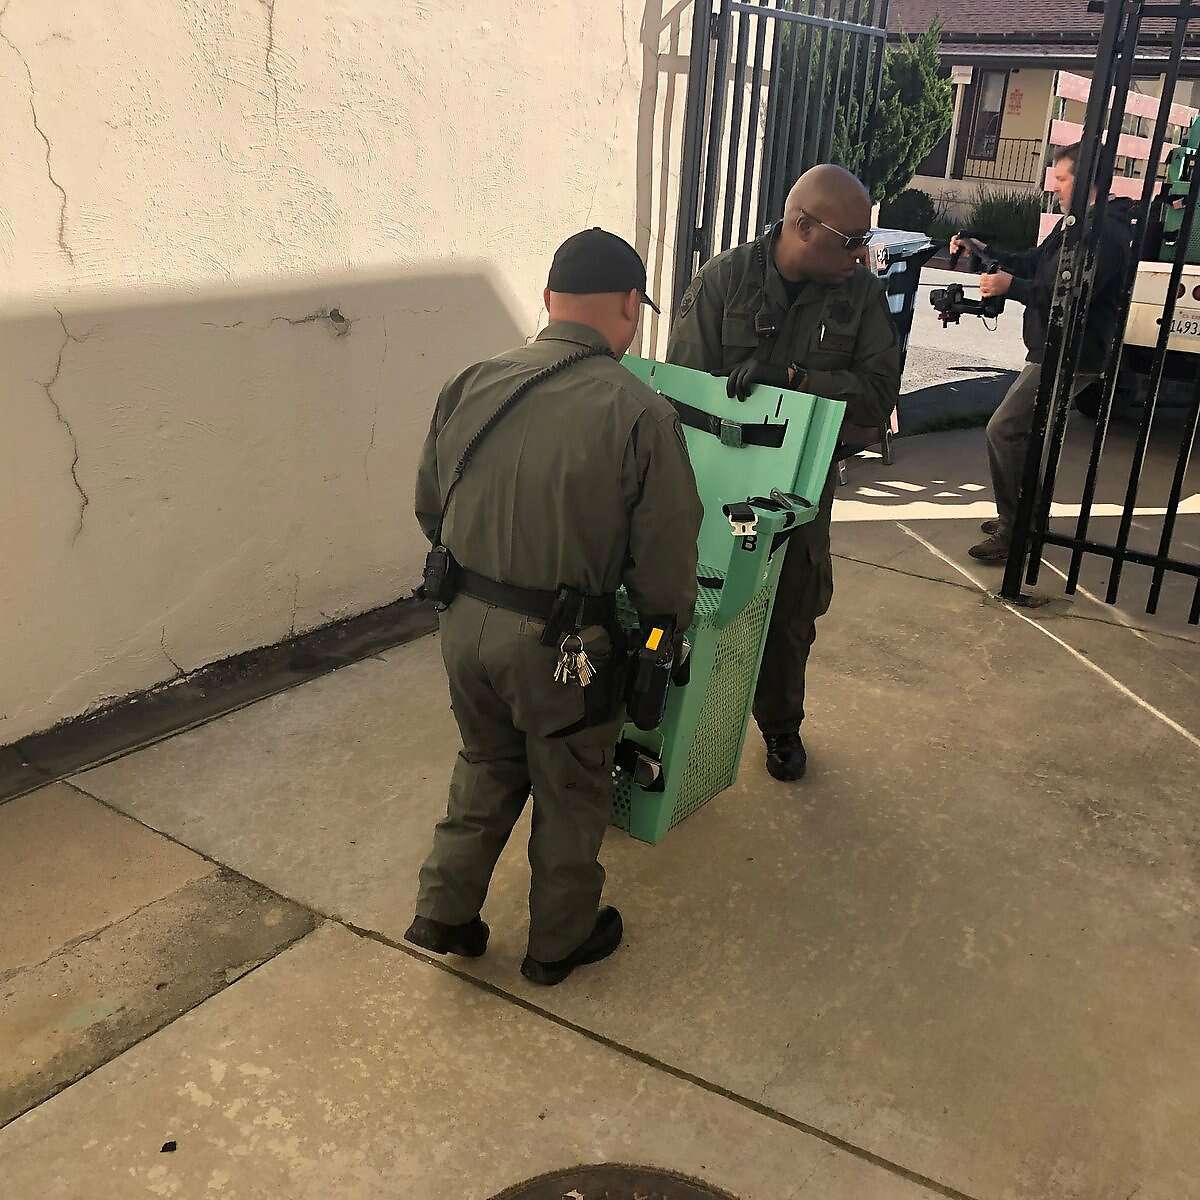 Workers at San Quentin State Prison remove pieces of California's dismantled death chamber Wednesday after Gov. Gavin Newsom ordered a halt to enforcement of the death penalty in the state.